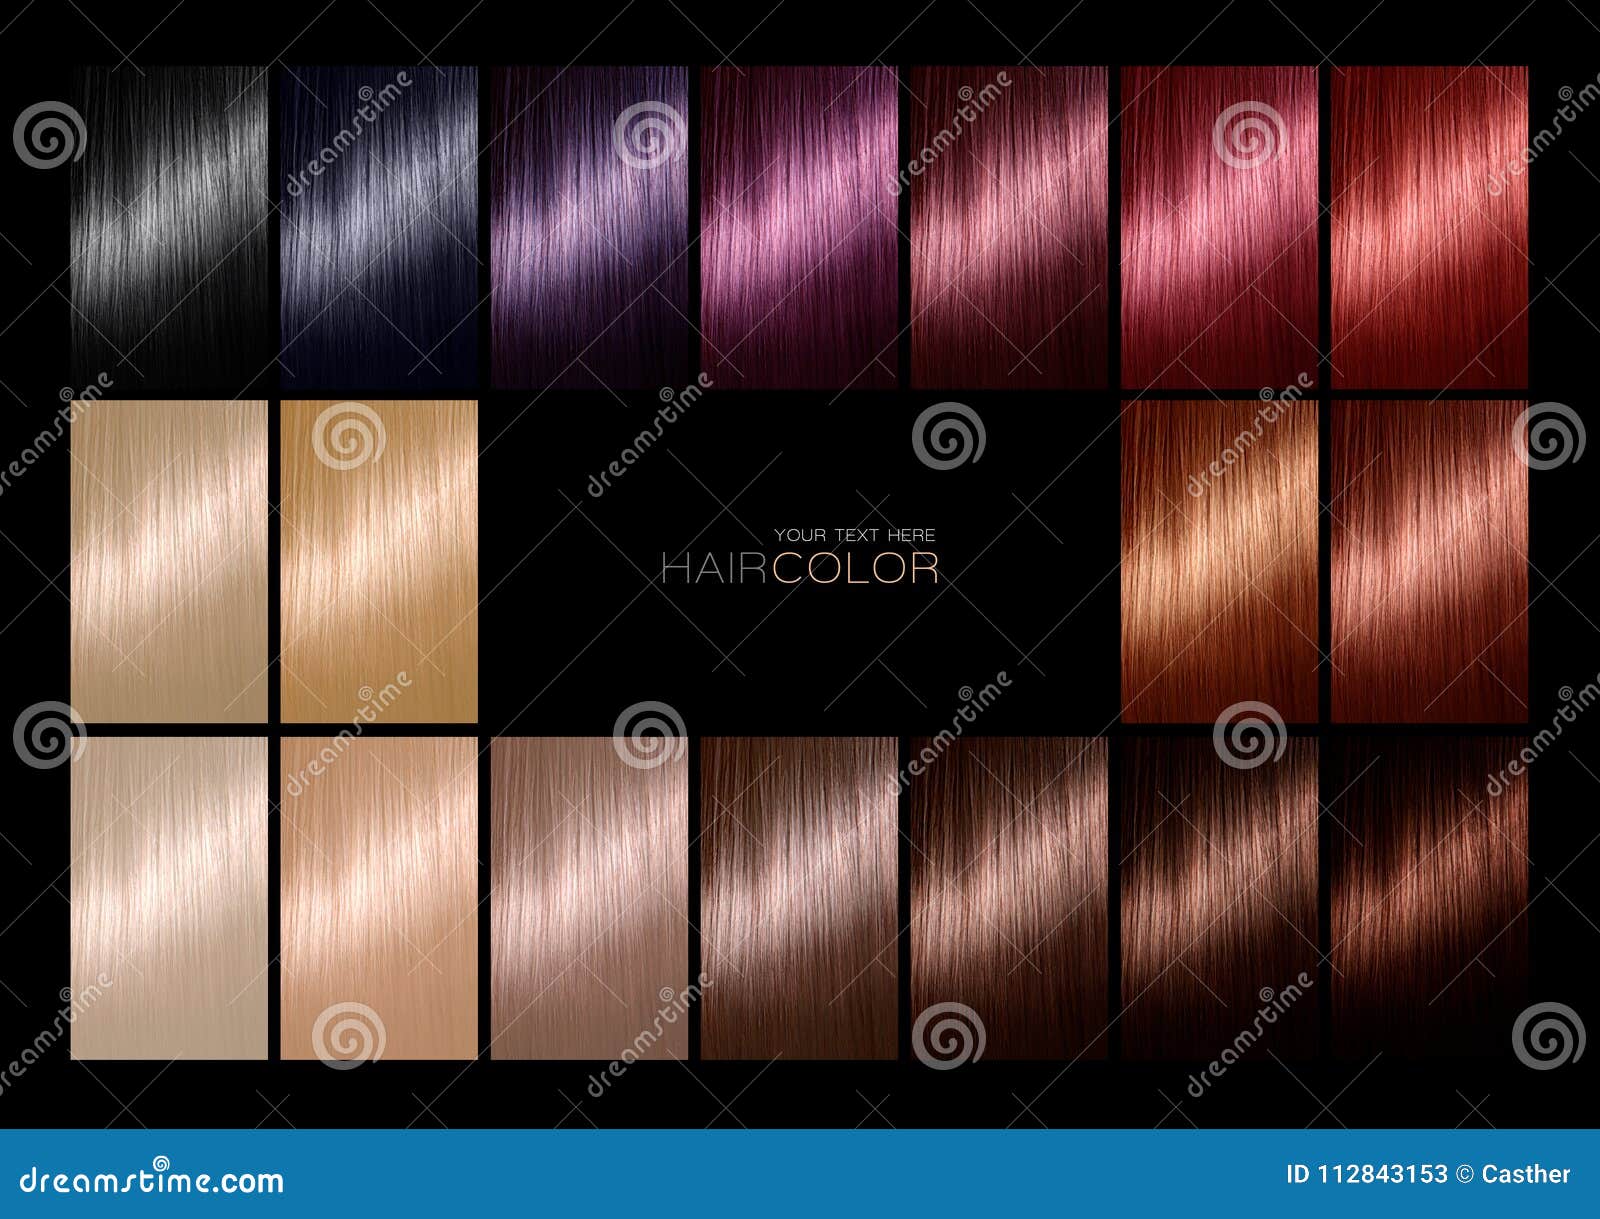 3. "Blue Tint Hair Colour Ideas for Different Skin Tones" - wide 9